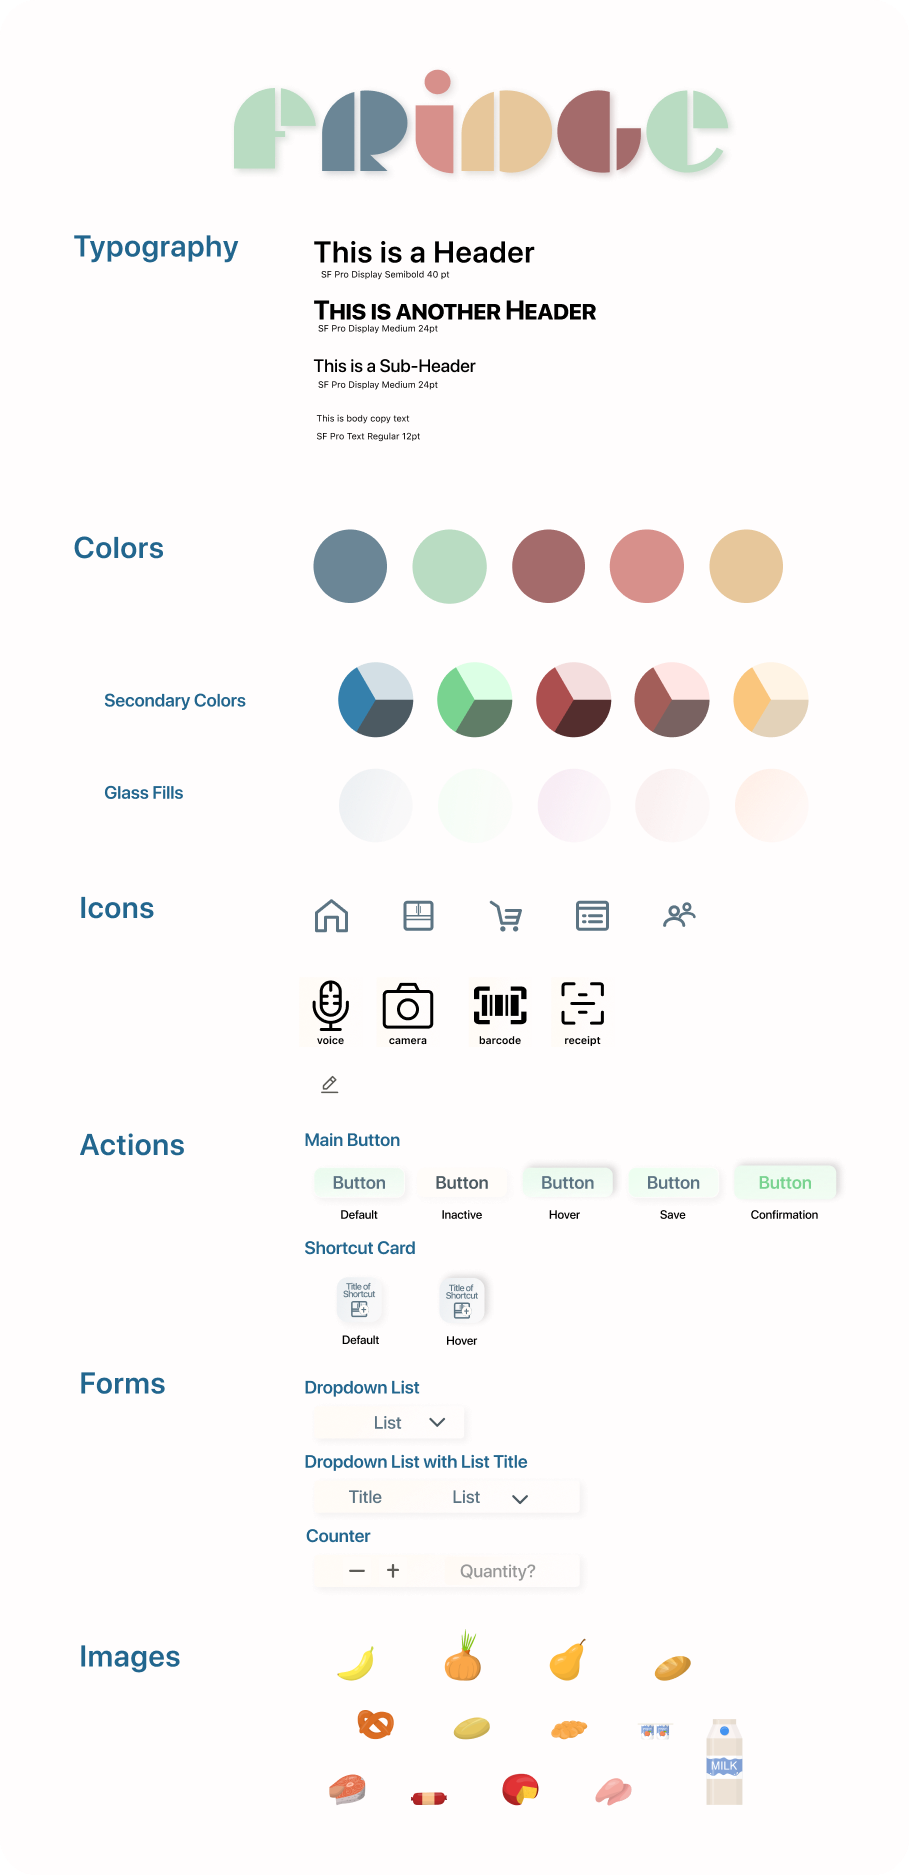 Image of Fridge's design style guide with examples of text, color, icons, actions, forms, and Images used in the application